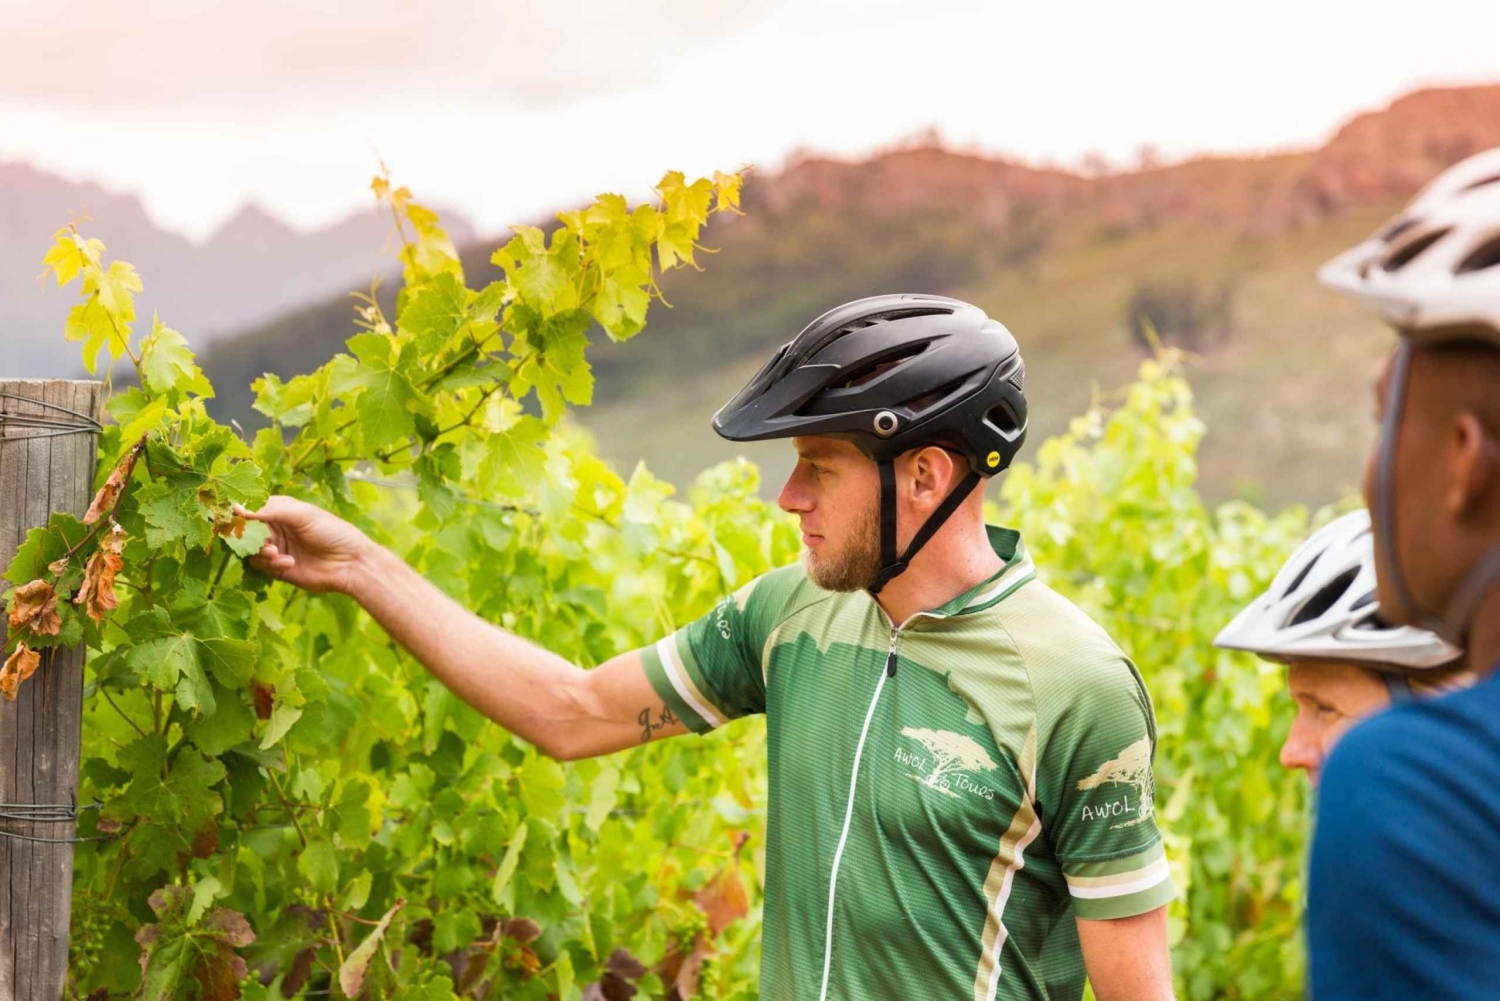 From Cape Town: Winelands Cycling Tour